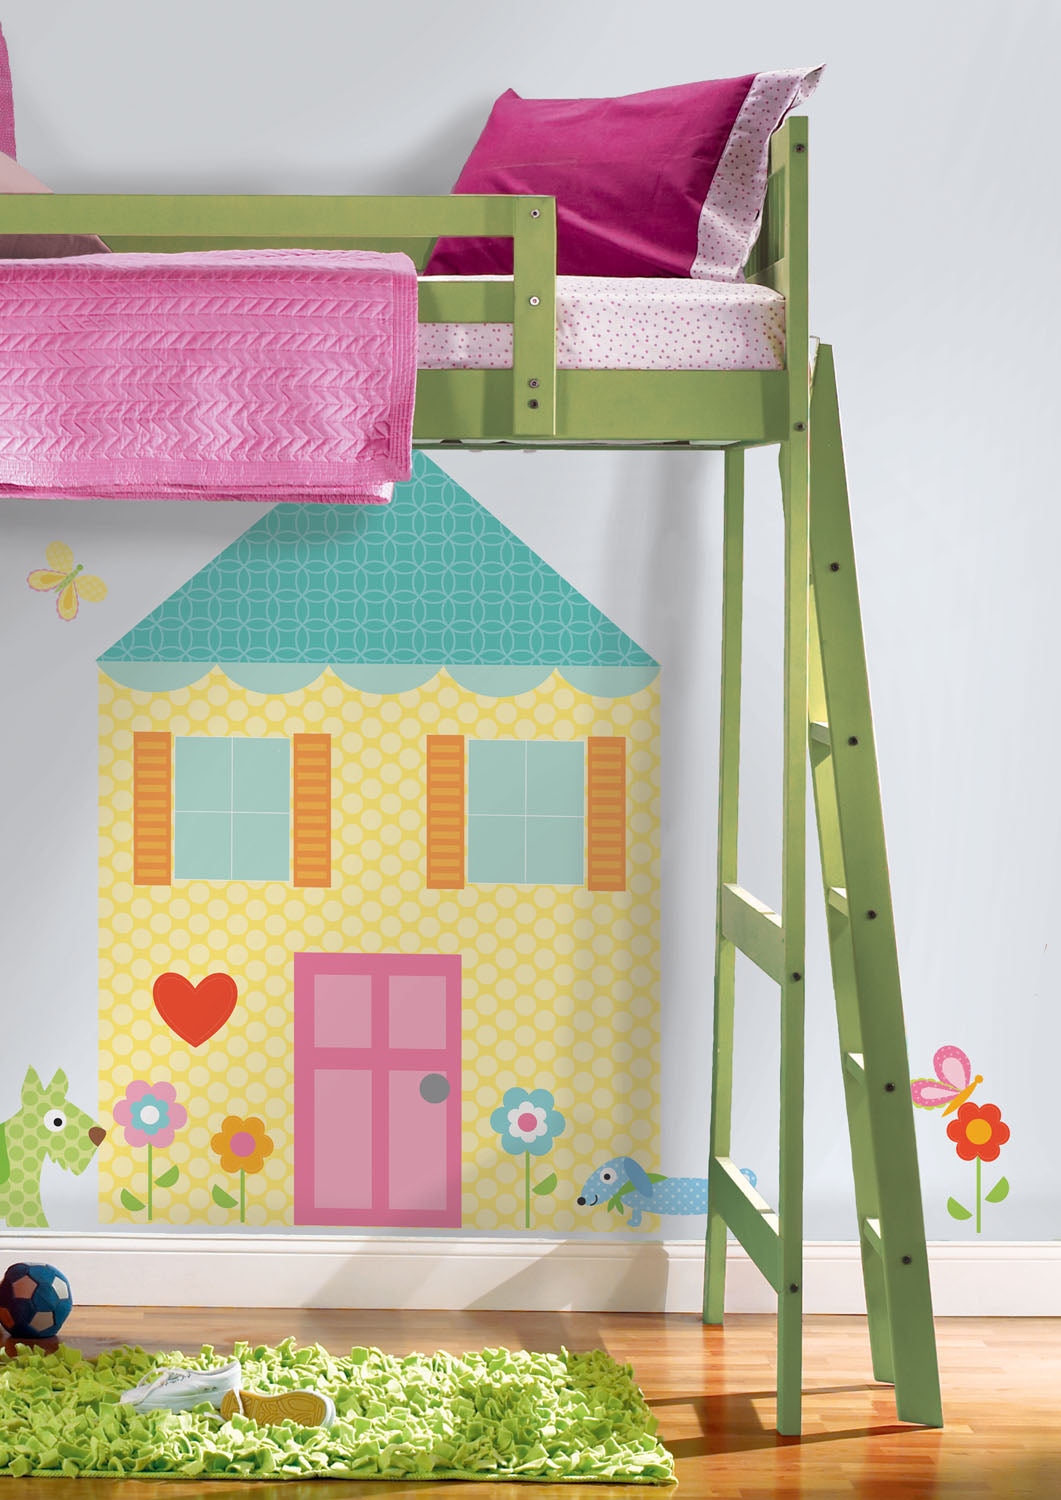 Build-a-House Peel & Stick MegaPack Wall Decals